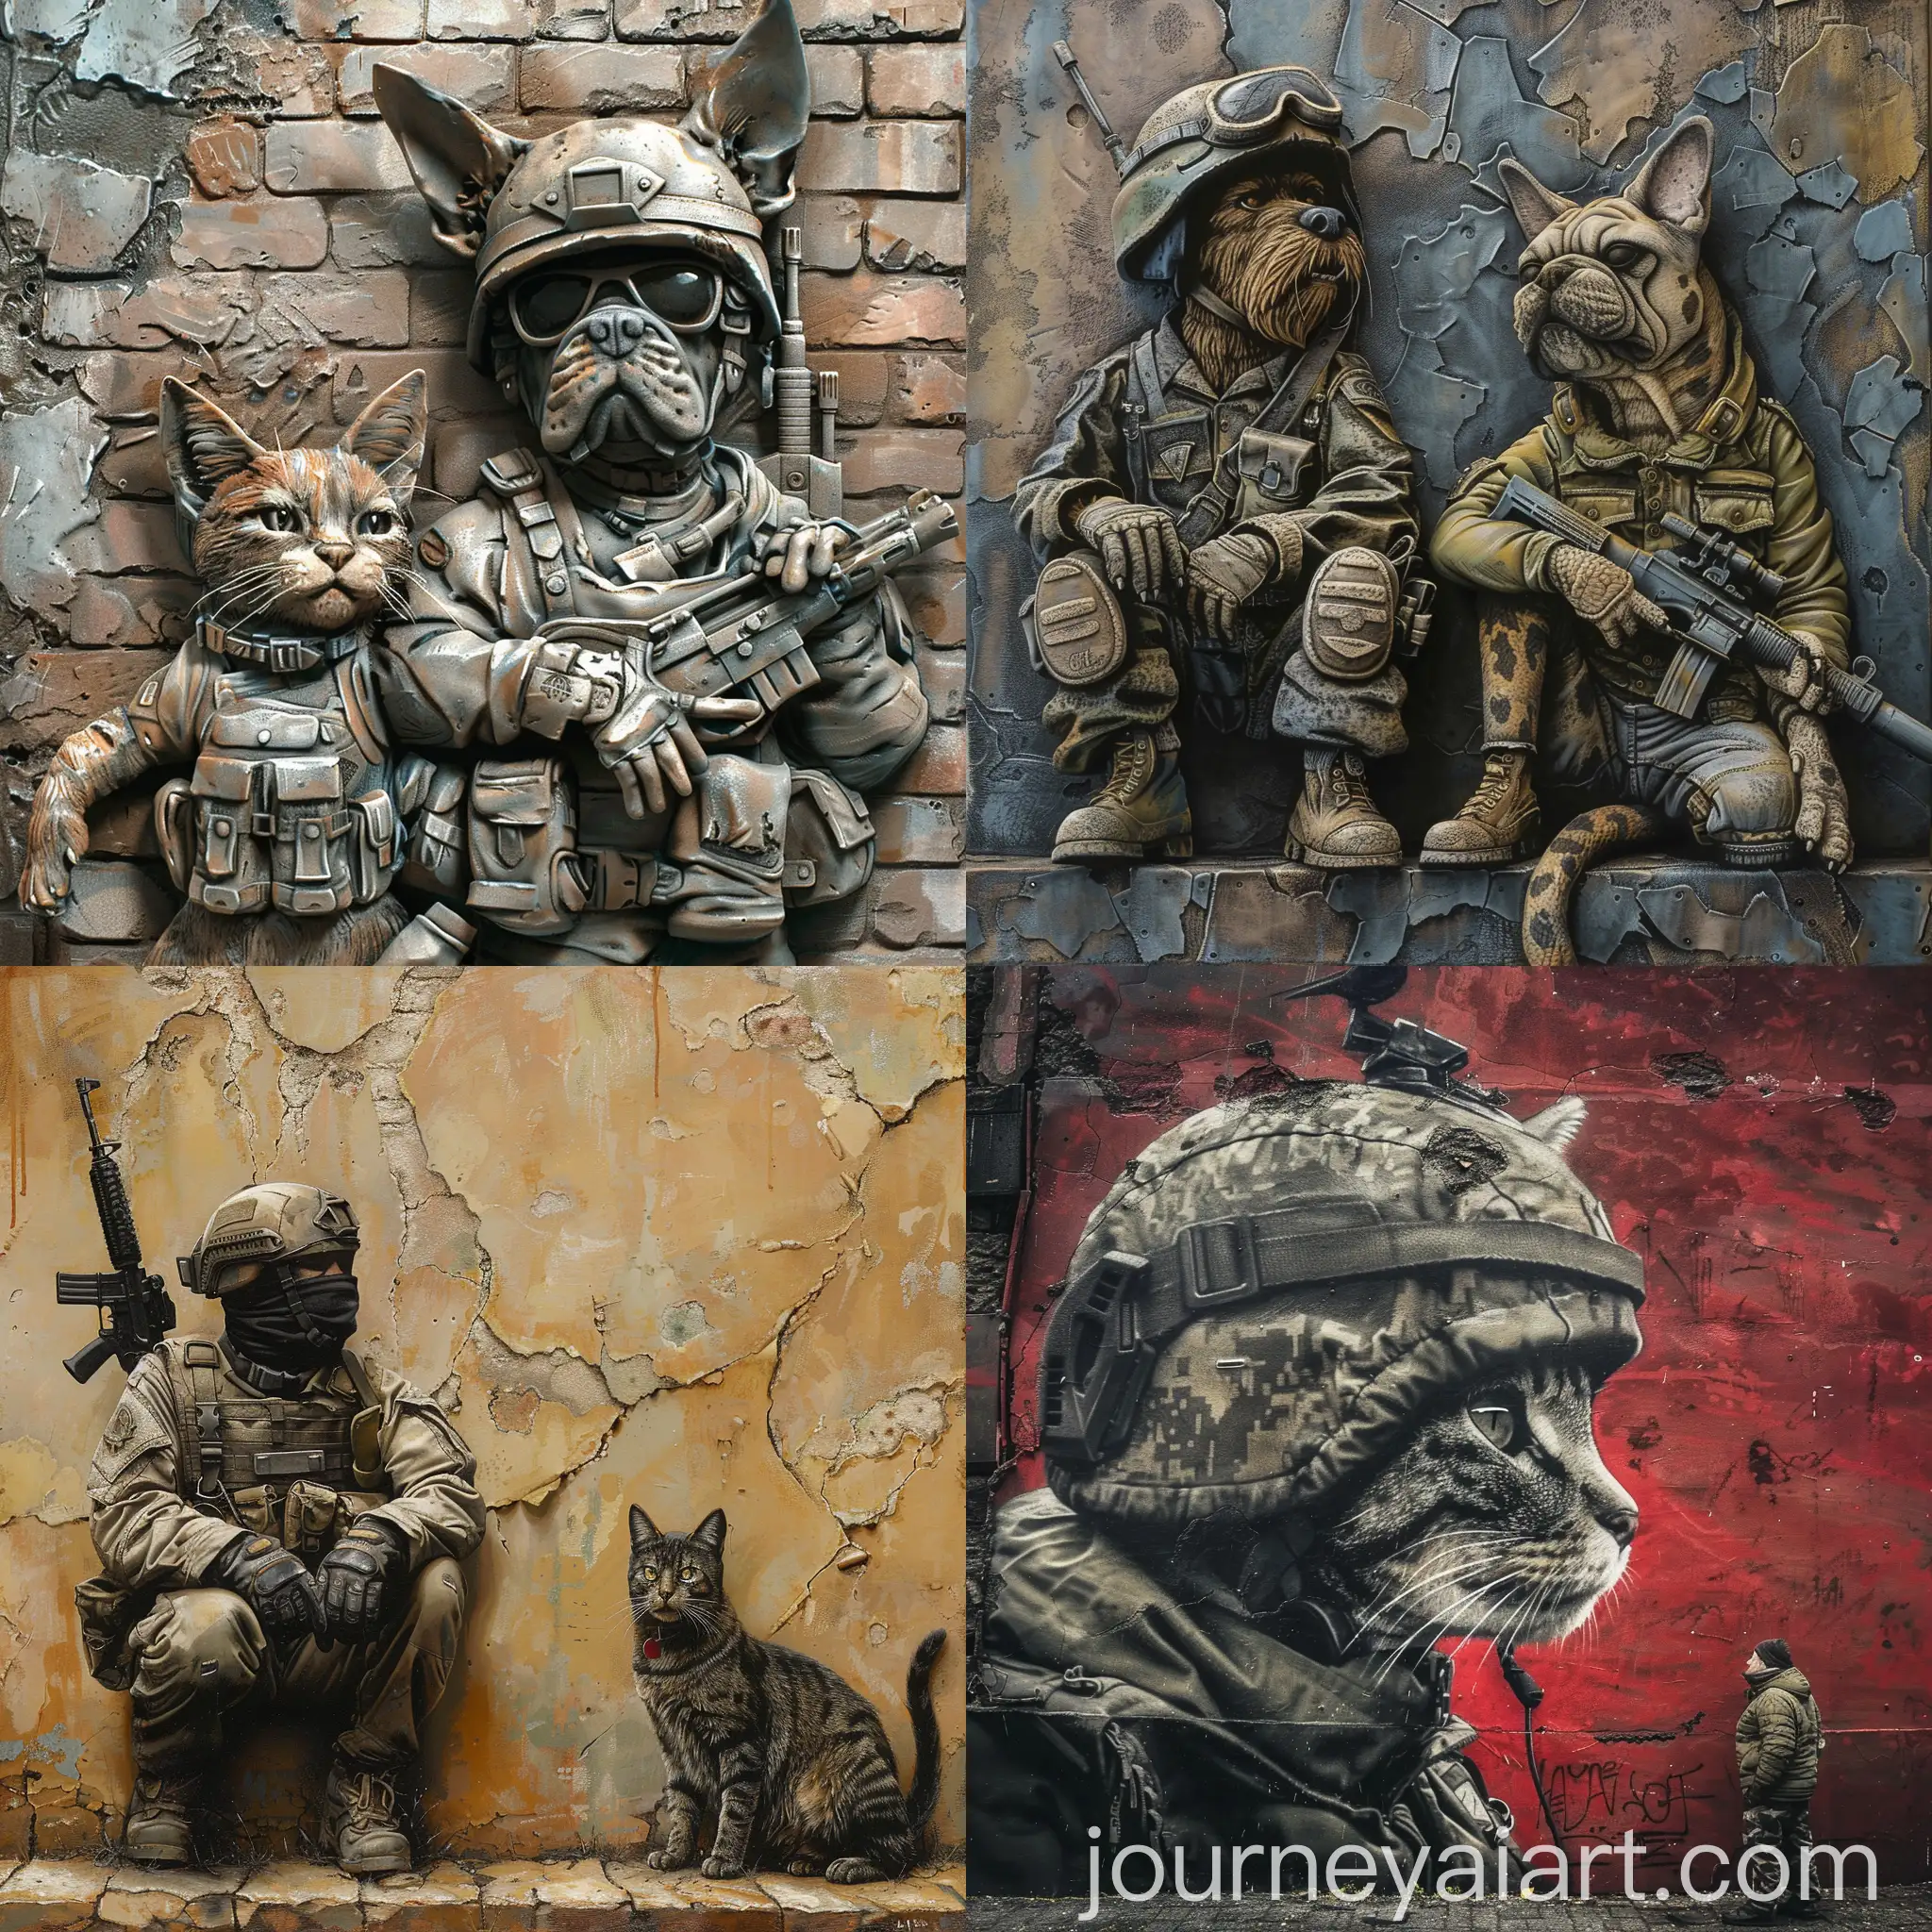 Cat-and-Dog-Playing-on-a-Wall-with-a-Soldier-in-a-Humorous-Scene